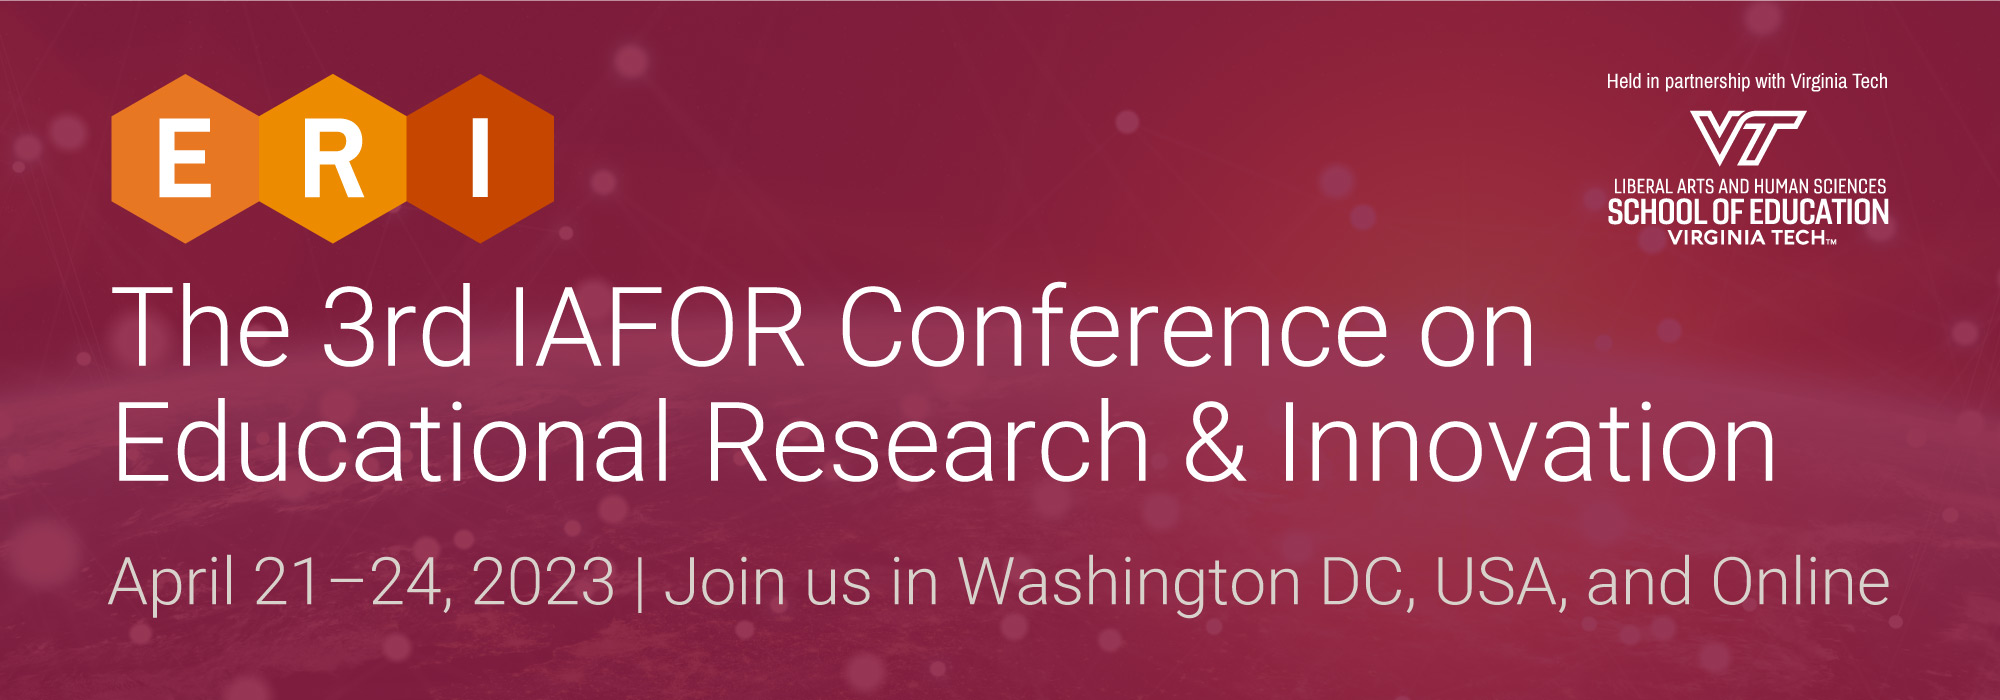 The IAFOR Conference on Educational Research & Innovation (ERI2023)